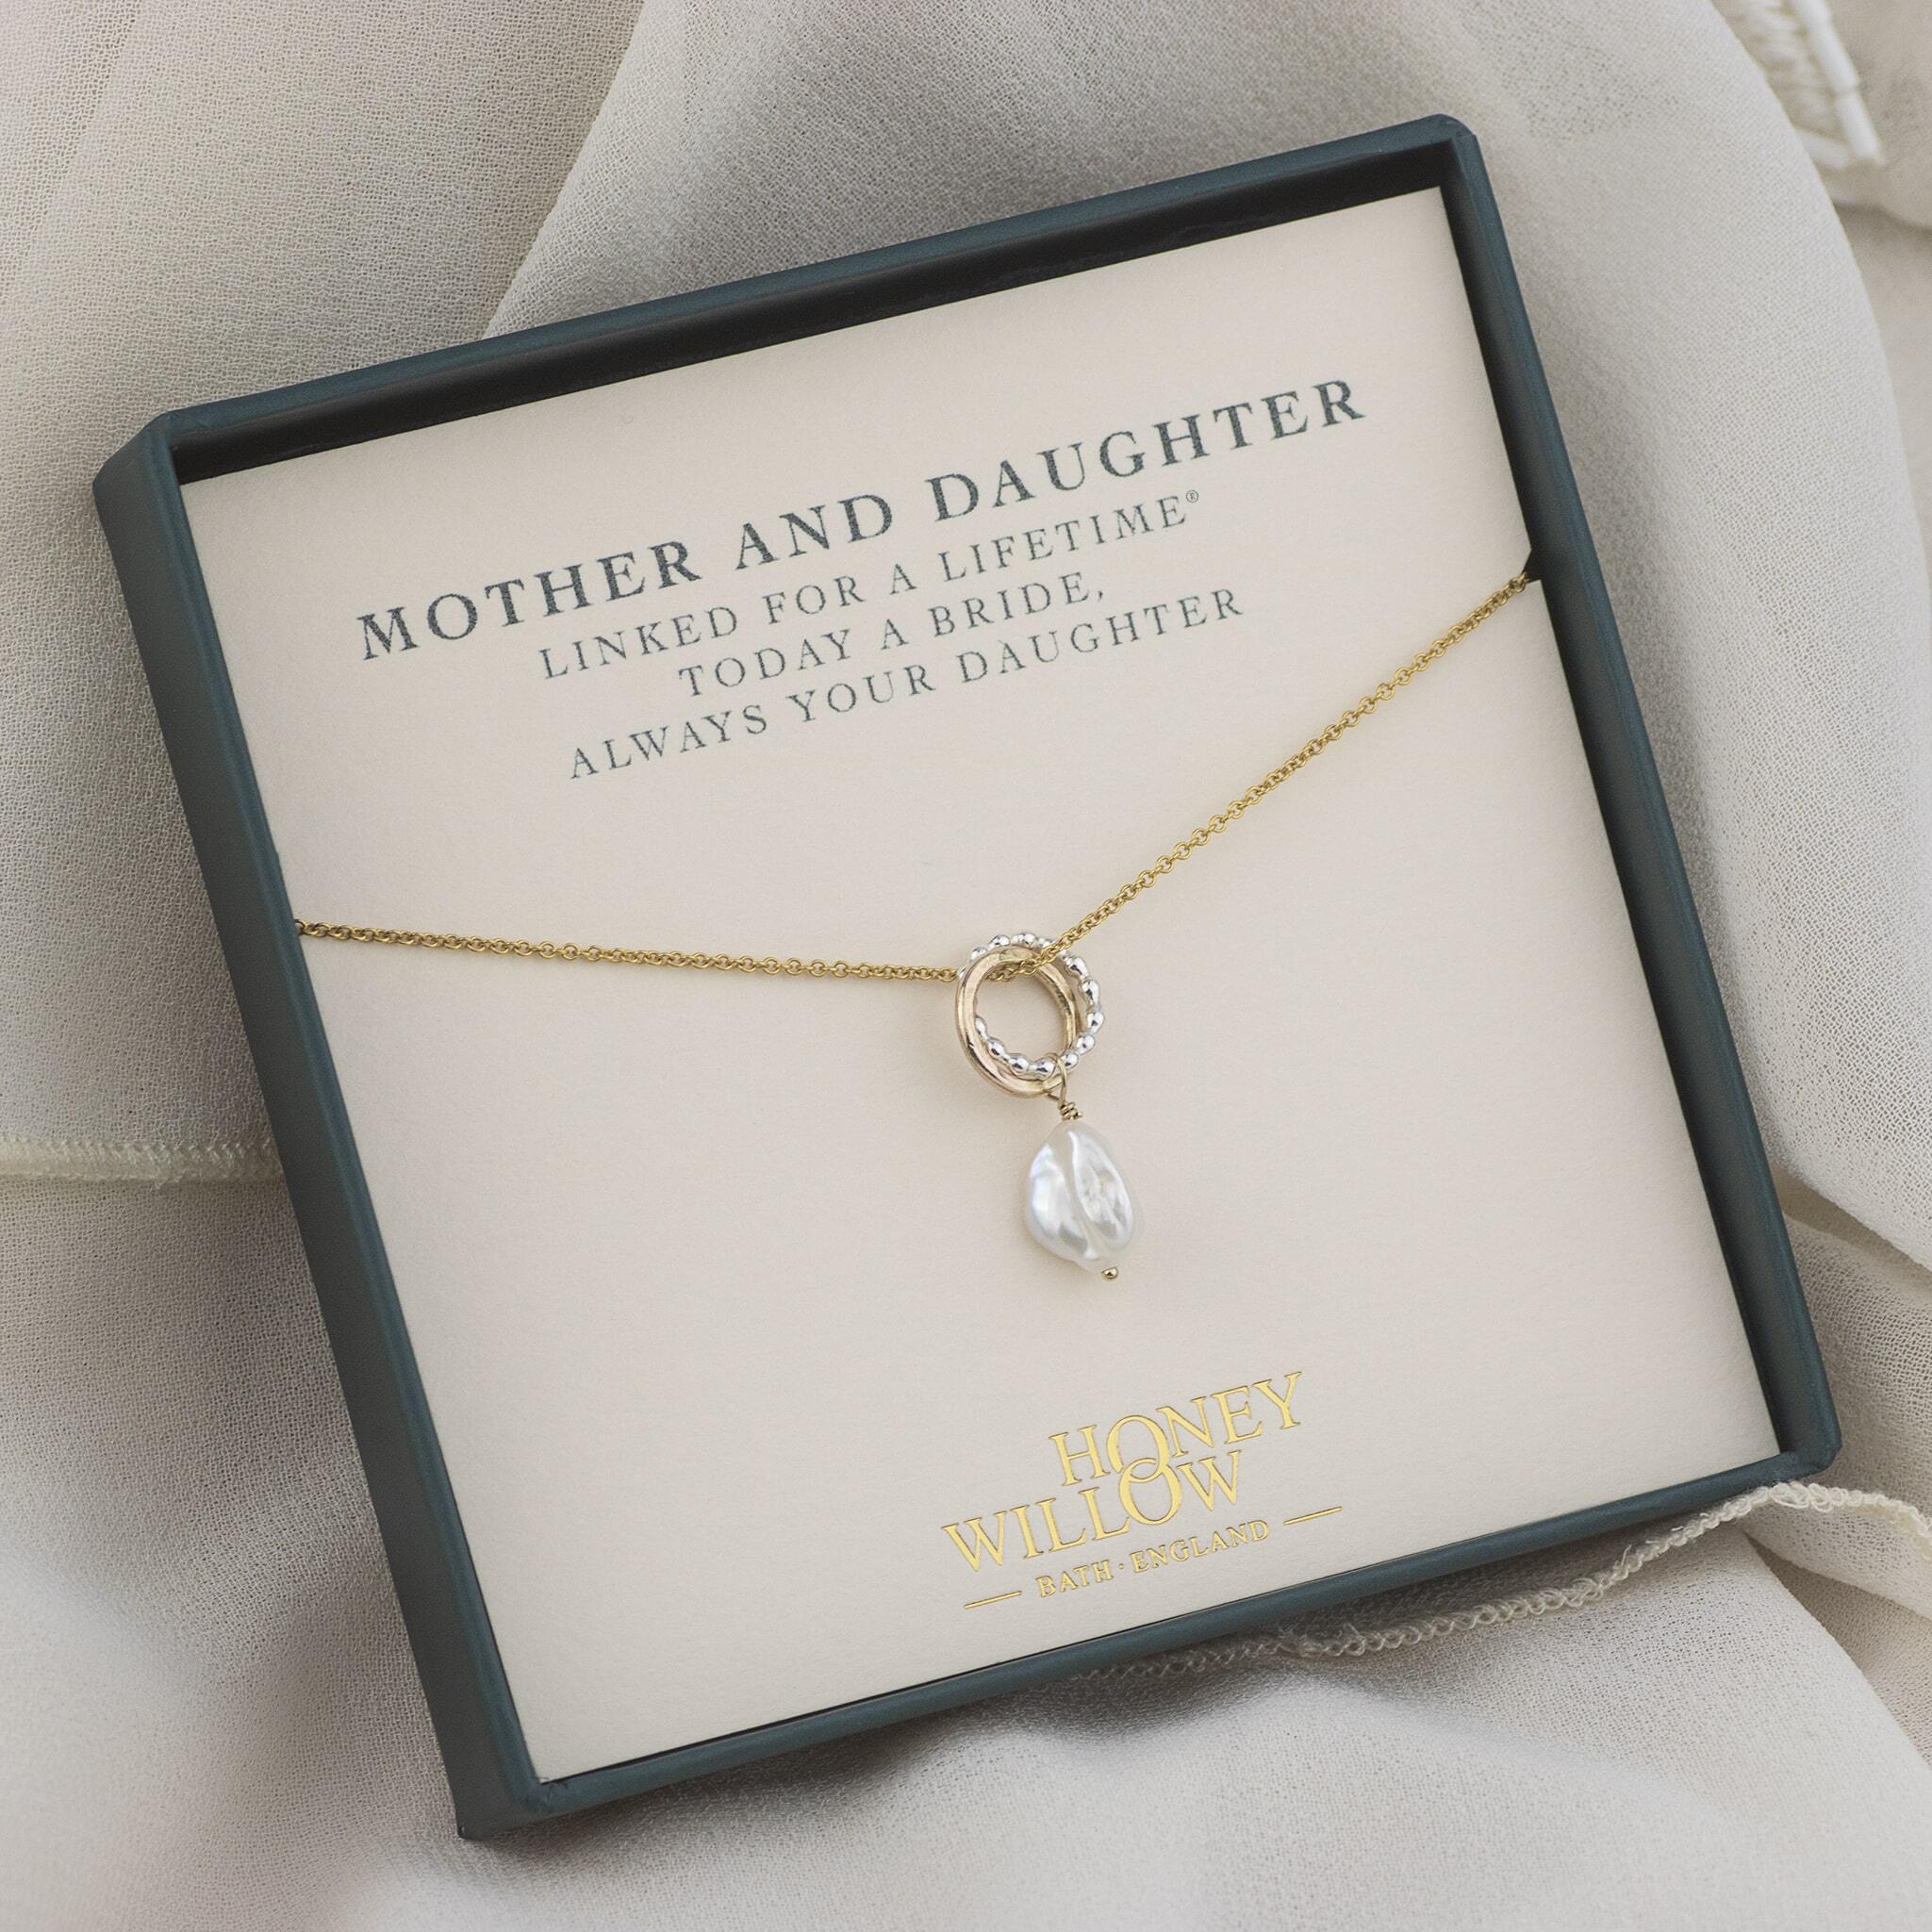 Mother of the Bride Mother's Day Gift, Jewelry Gift for Mother in Law,  Necklace and Card Gift Set, Gift for Mom, Gift for Her, Jewelry for Mom,  Thank you Gift [Rose Gold